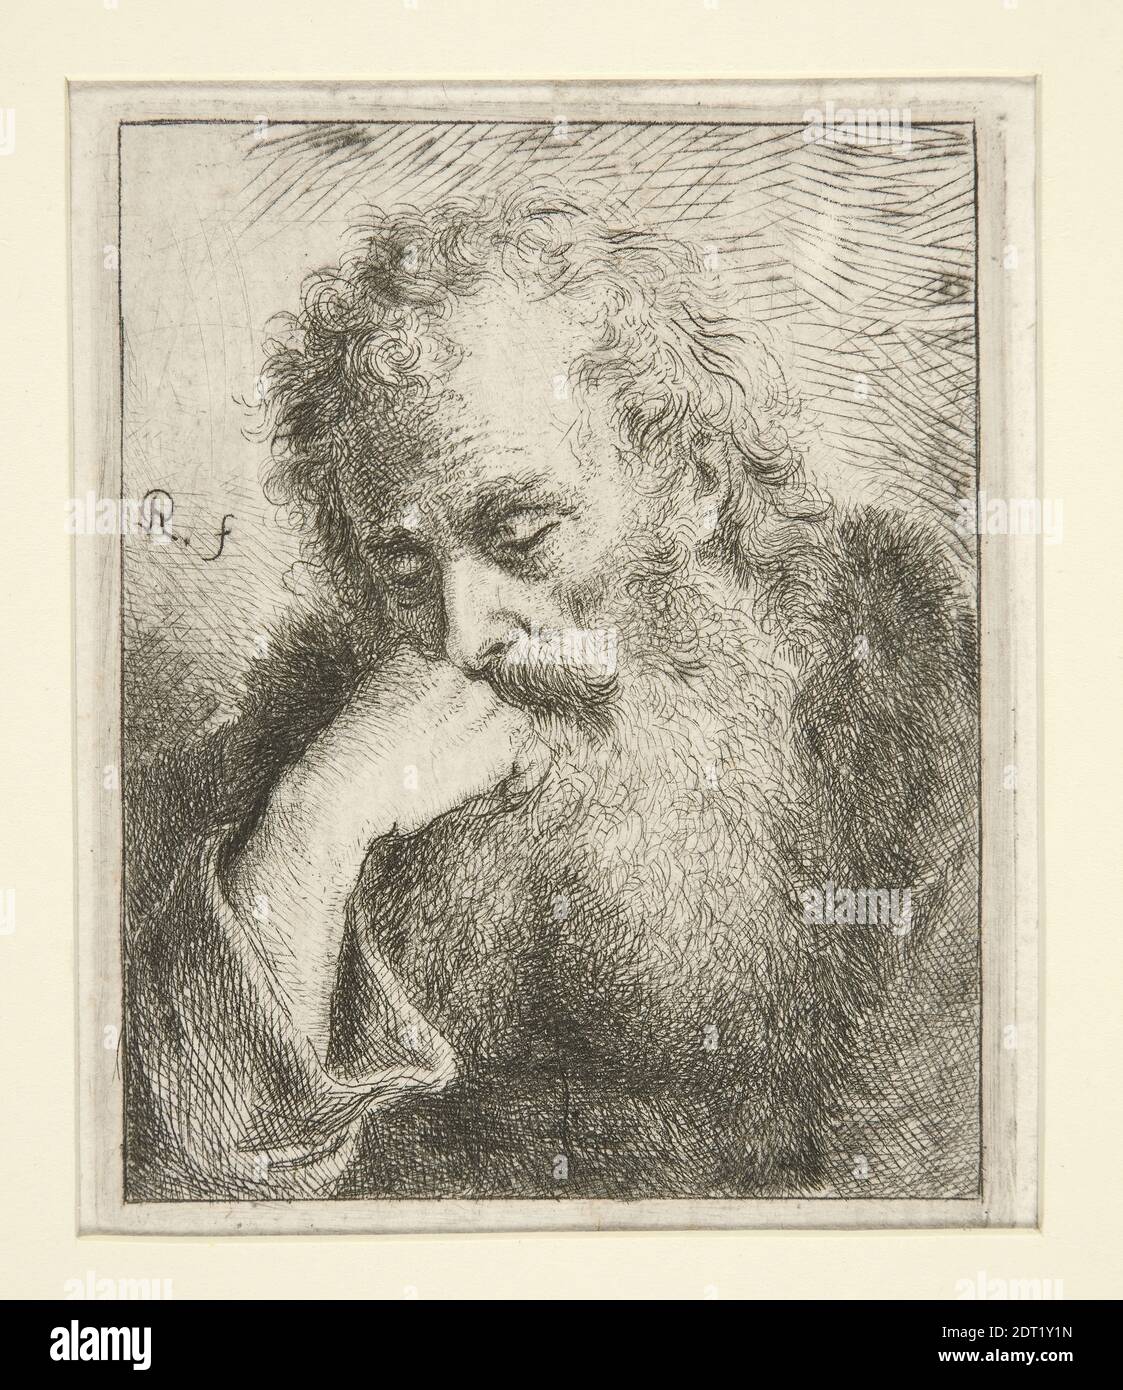 Etcher: Unknown, Artist, style of: Rembrandt (Rembrandt van Rijn), Dutch, 1606–1669, Old Man with Long Flowing Beard Resting Head on Hand, Etching, platemark: 9.1 × 7.3 cm (3 9/16 × 2 7/8 in.), Made in The Netherlands, Dutch, 17th century, Works on Paper - Prints Stock Photo